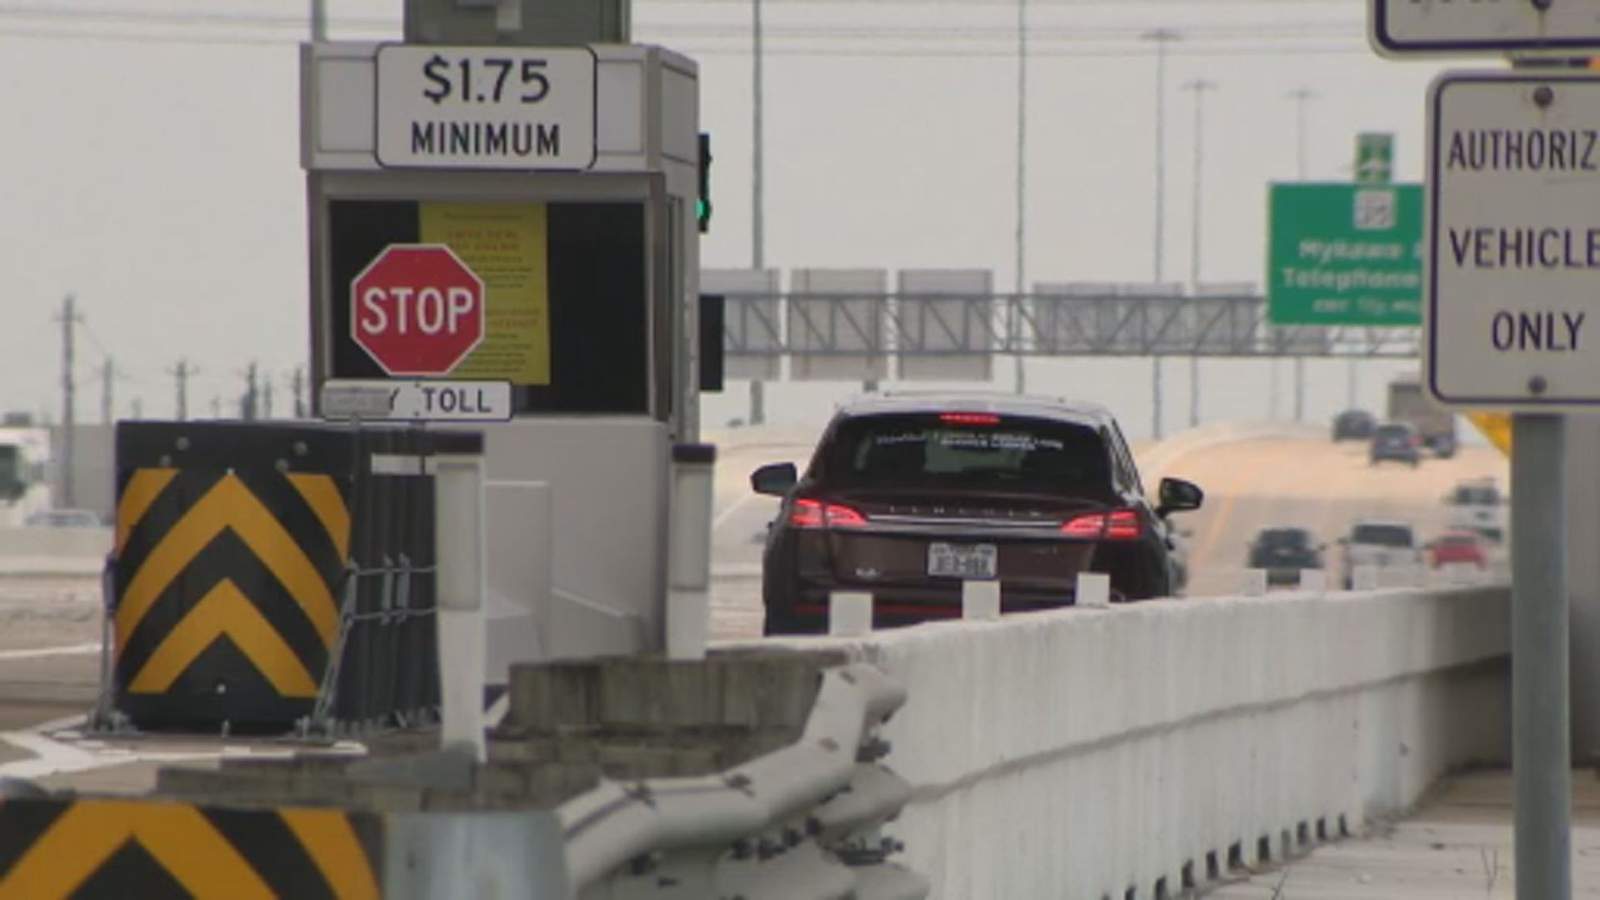 Harris County toll roads generate hundreds of millions a year. Hidalgo, commissioners changed how money will be used